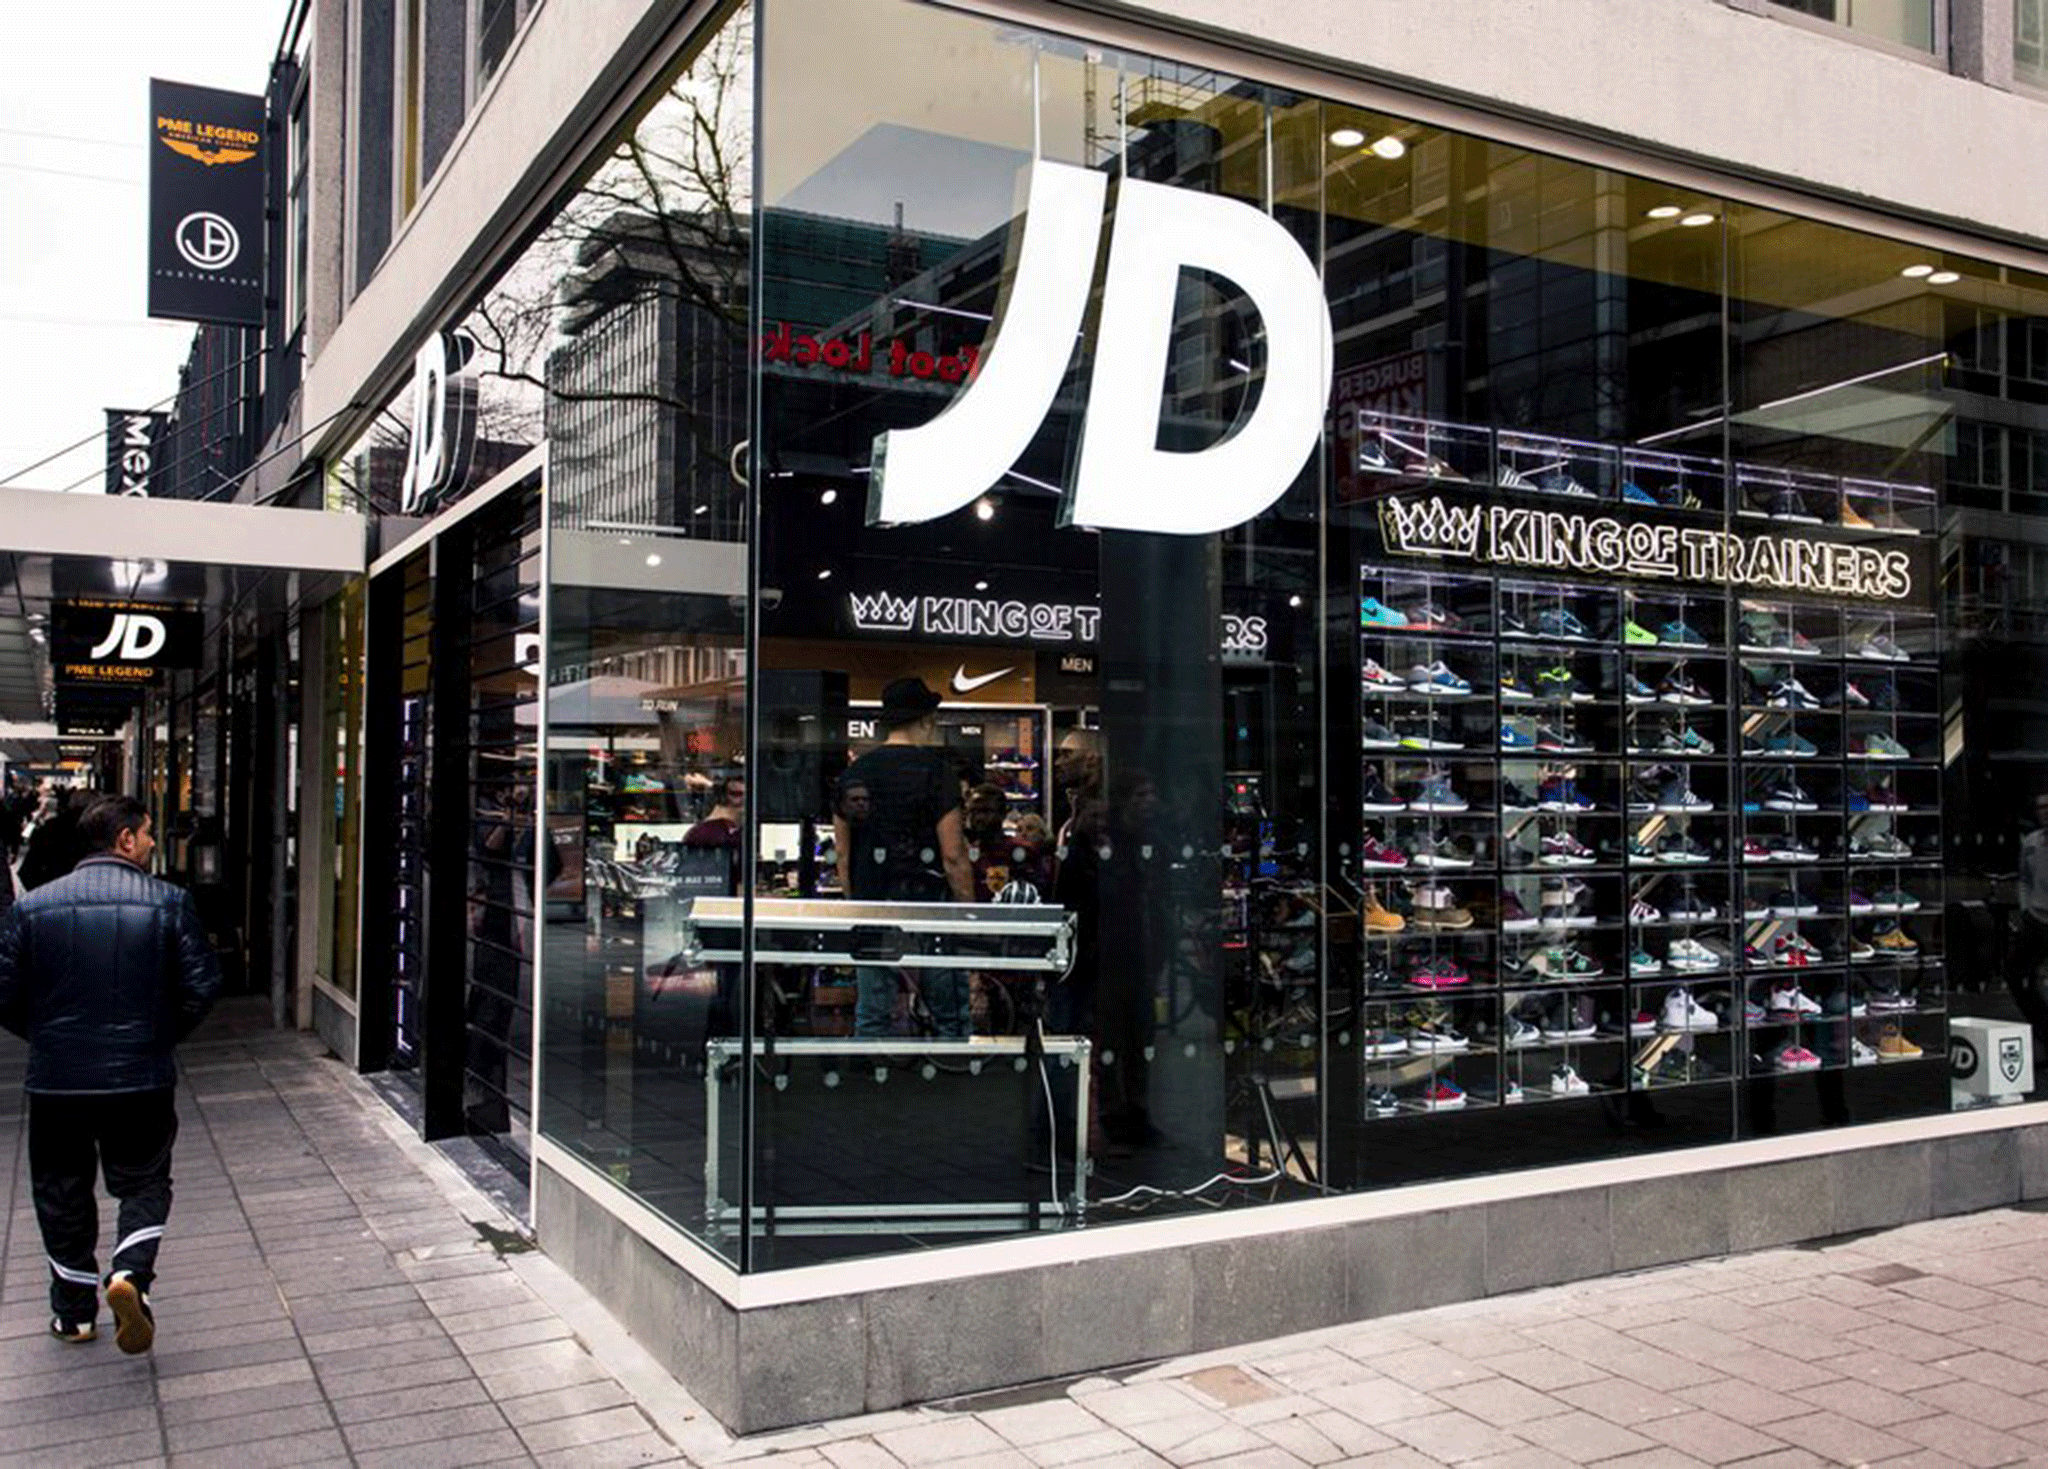 JD Sports has done brilliantly. A union could help sustain that 